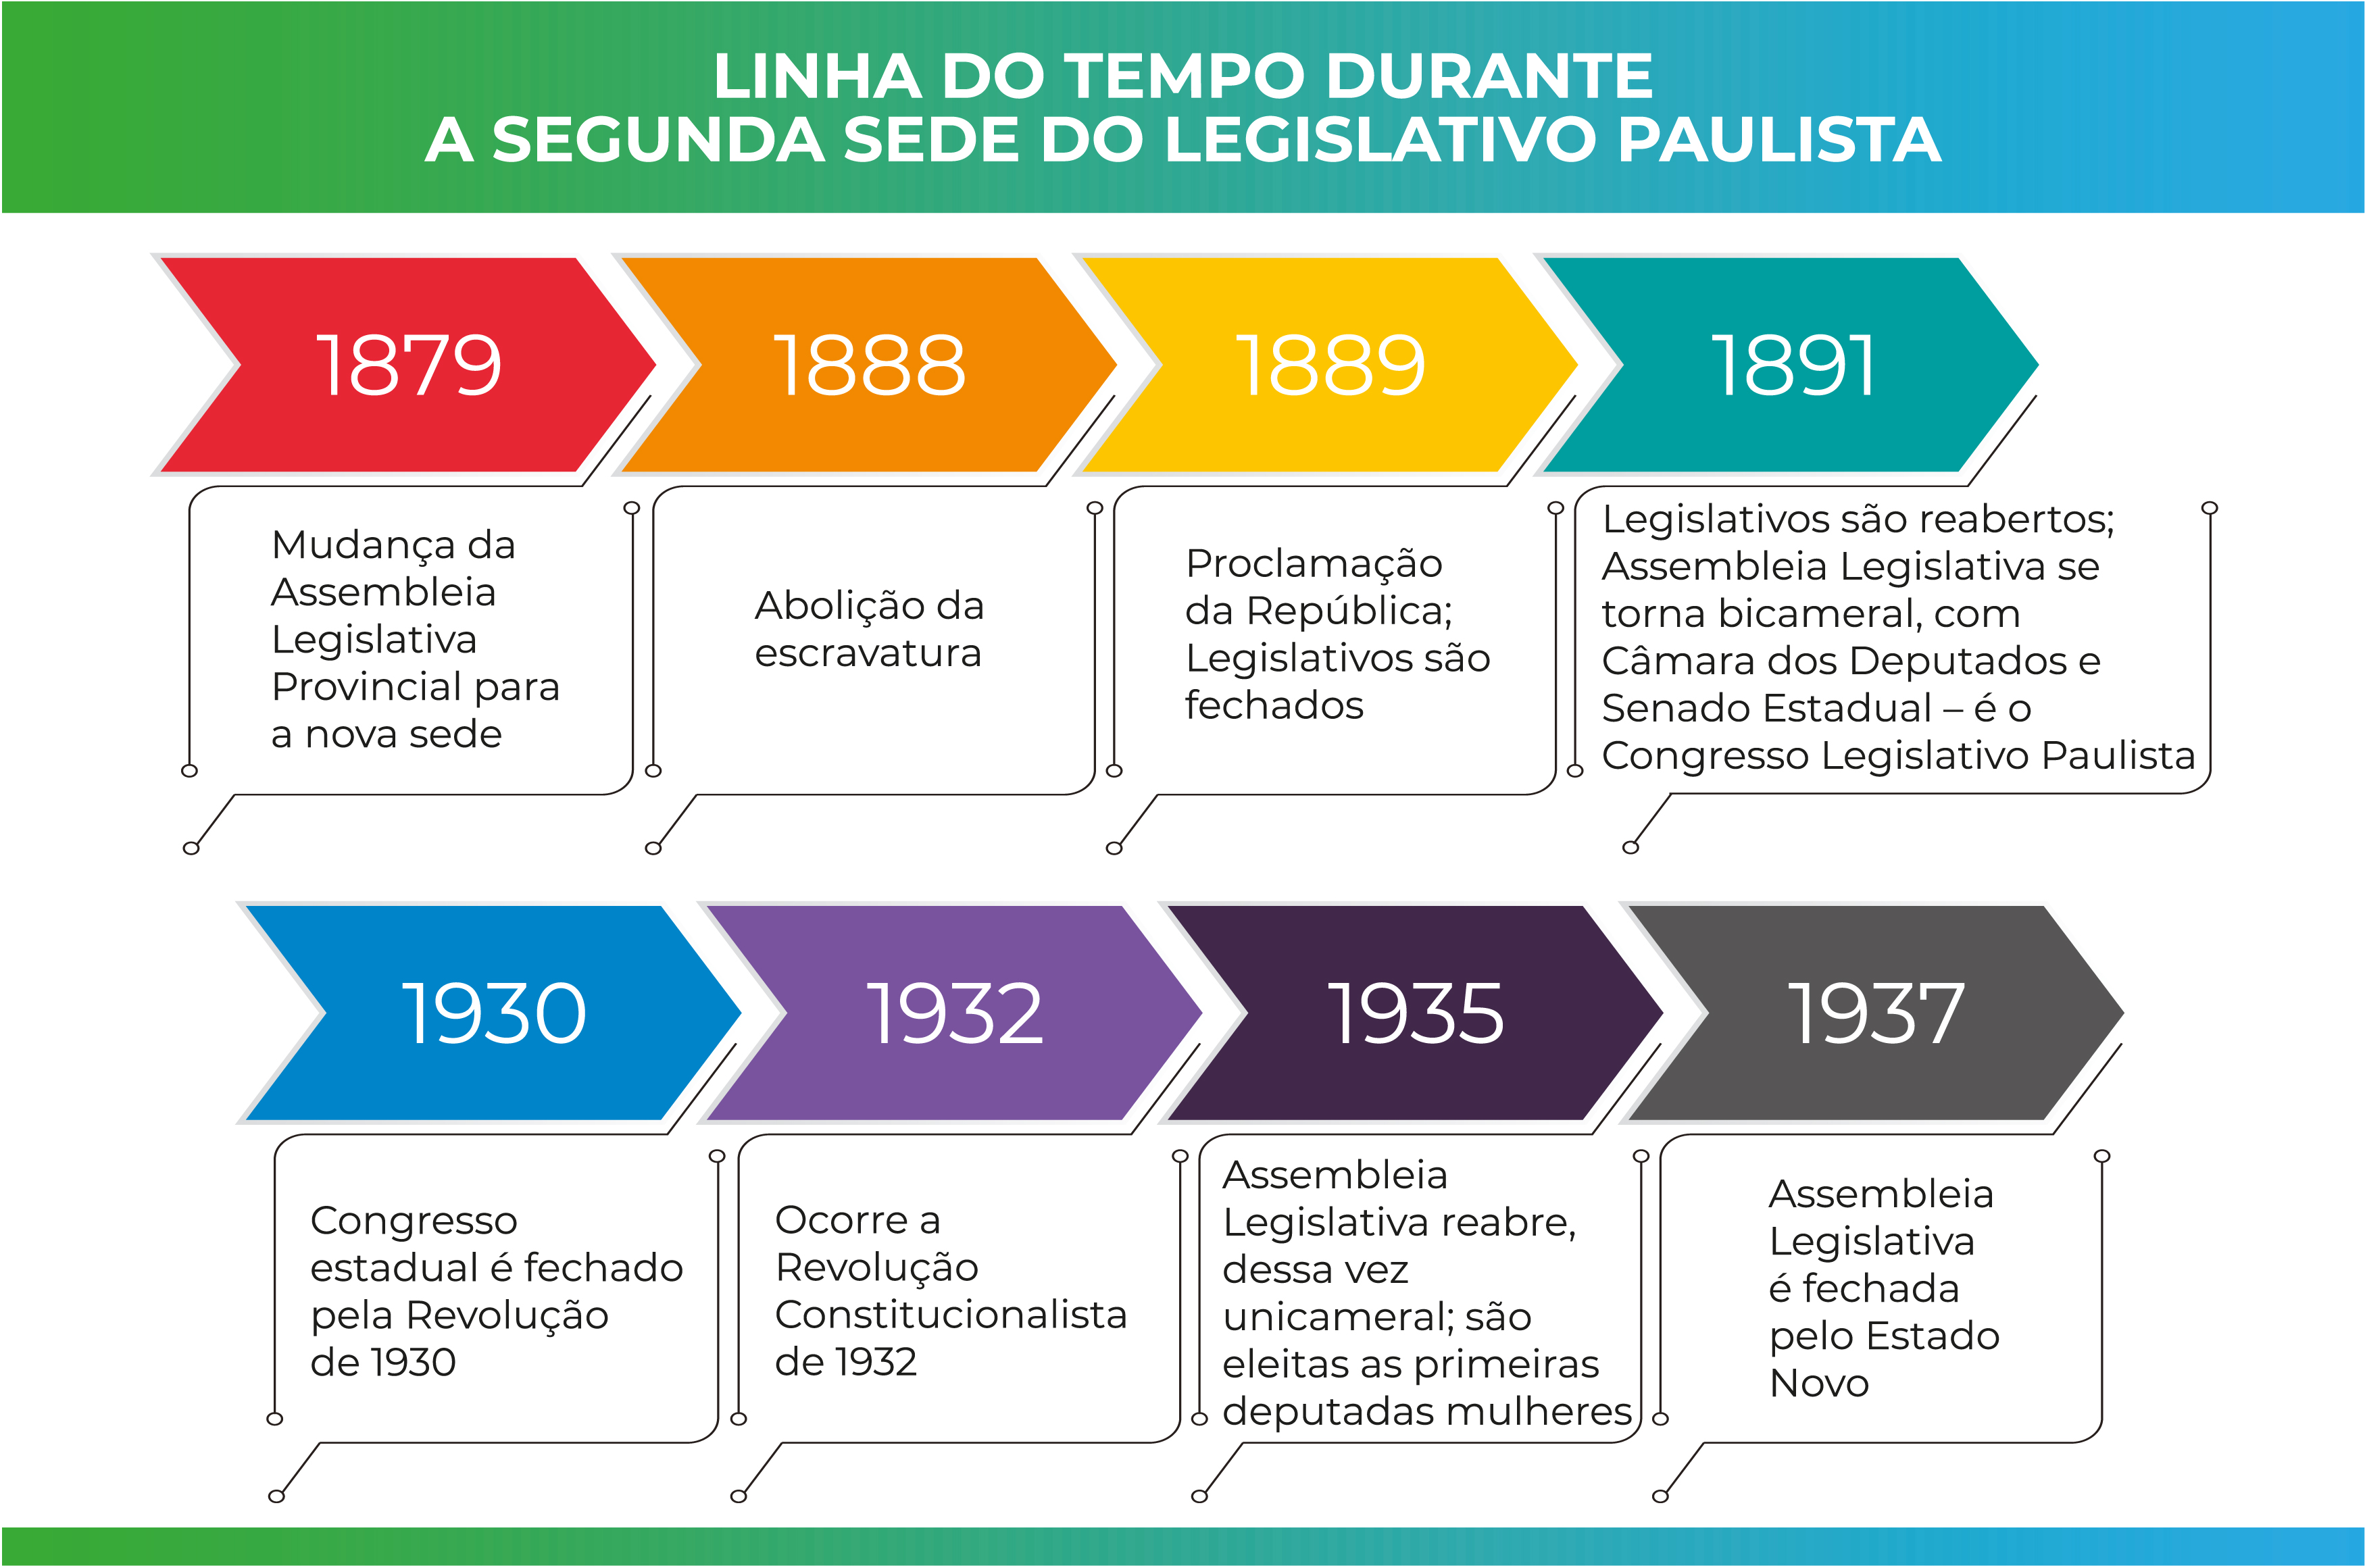 Infográfico<a style='float:right' href='https://www3.al.sp.gov.br/repositorio/noticia/N-01-2022/fg280886.jpg' target=_blank><img src='/_img/material-file-download-white.png' width='14px' alt='Clique para baixar a imagem'></a>